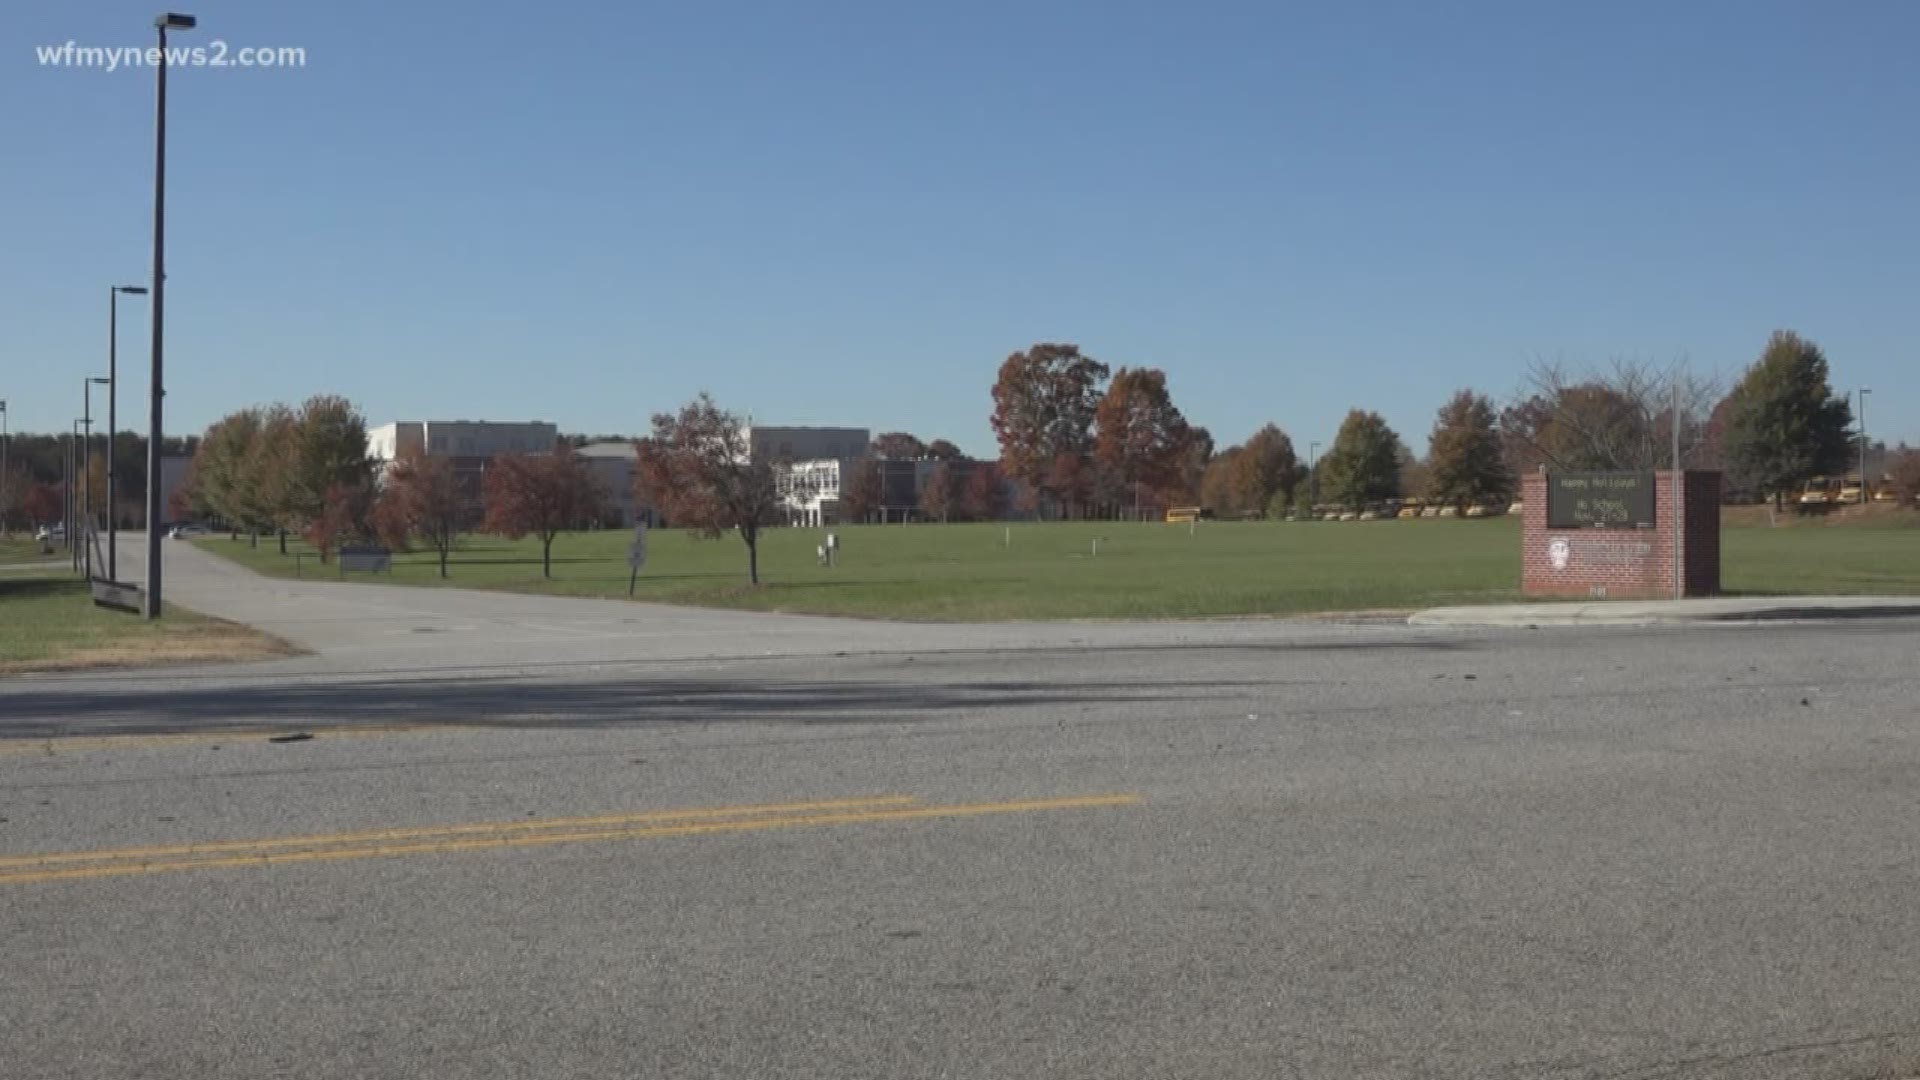 One Triad mom says parents were told the night prior to traffic patterns changing at Northern Guilford Middle and High Schools. She says the late notice led to chaos